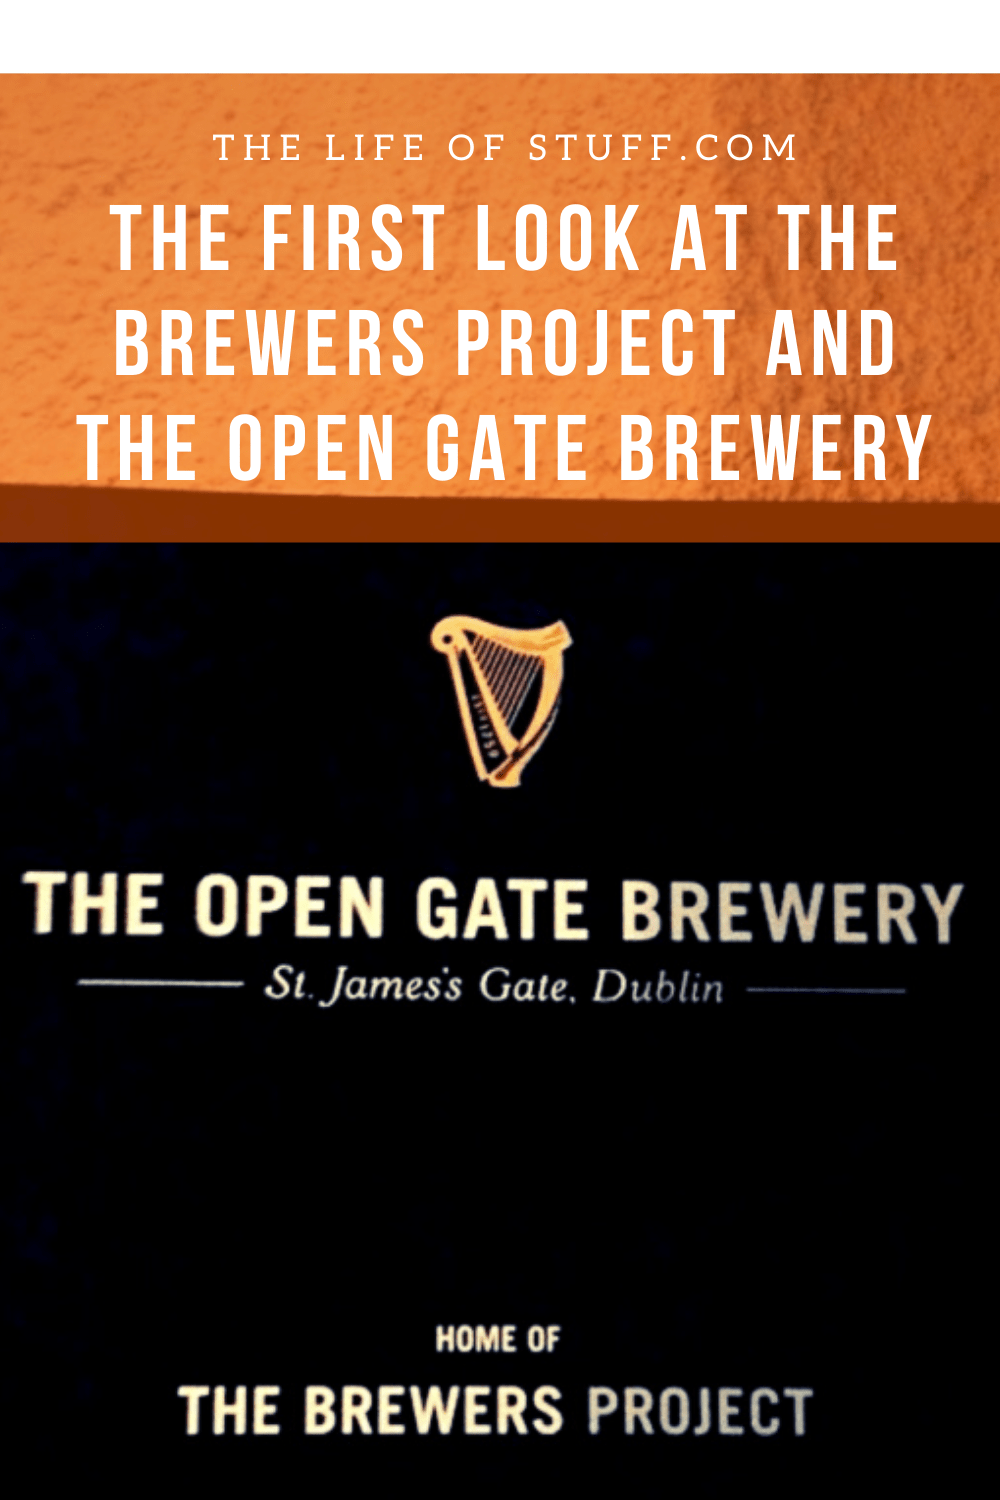 The Open Gate Brewery – St. James’s Gate, Dublin - The Life of Stuff